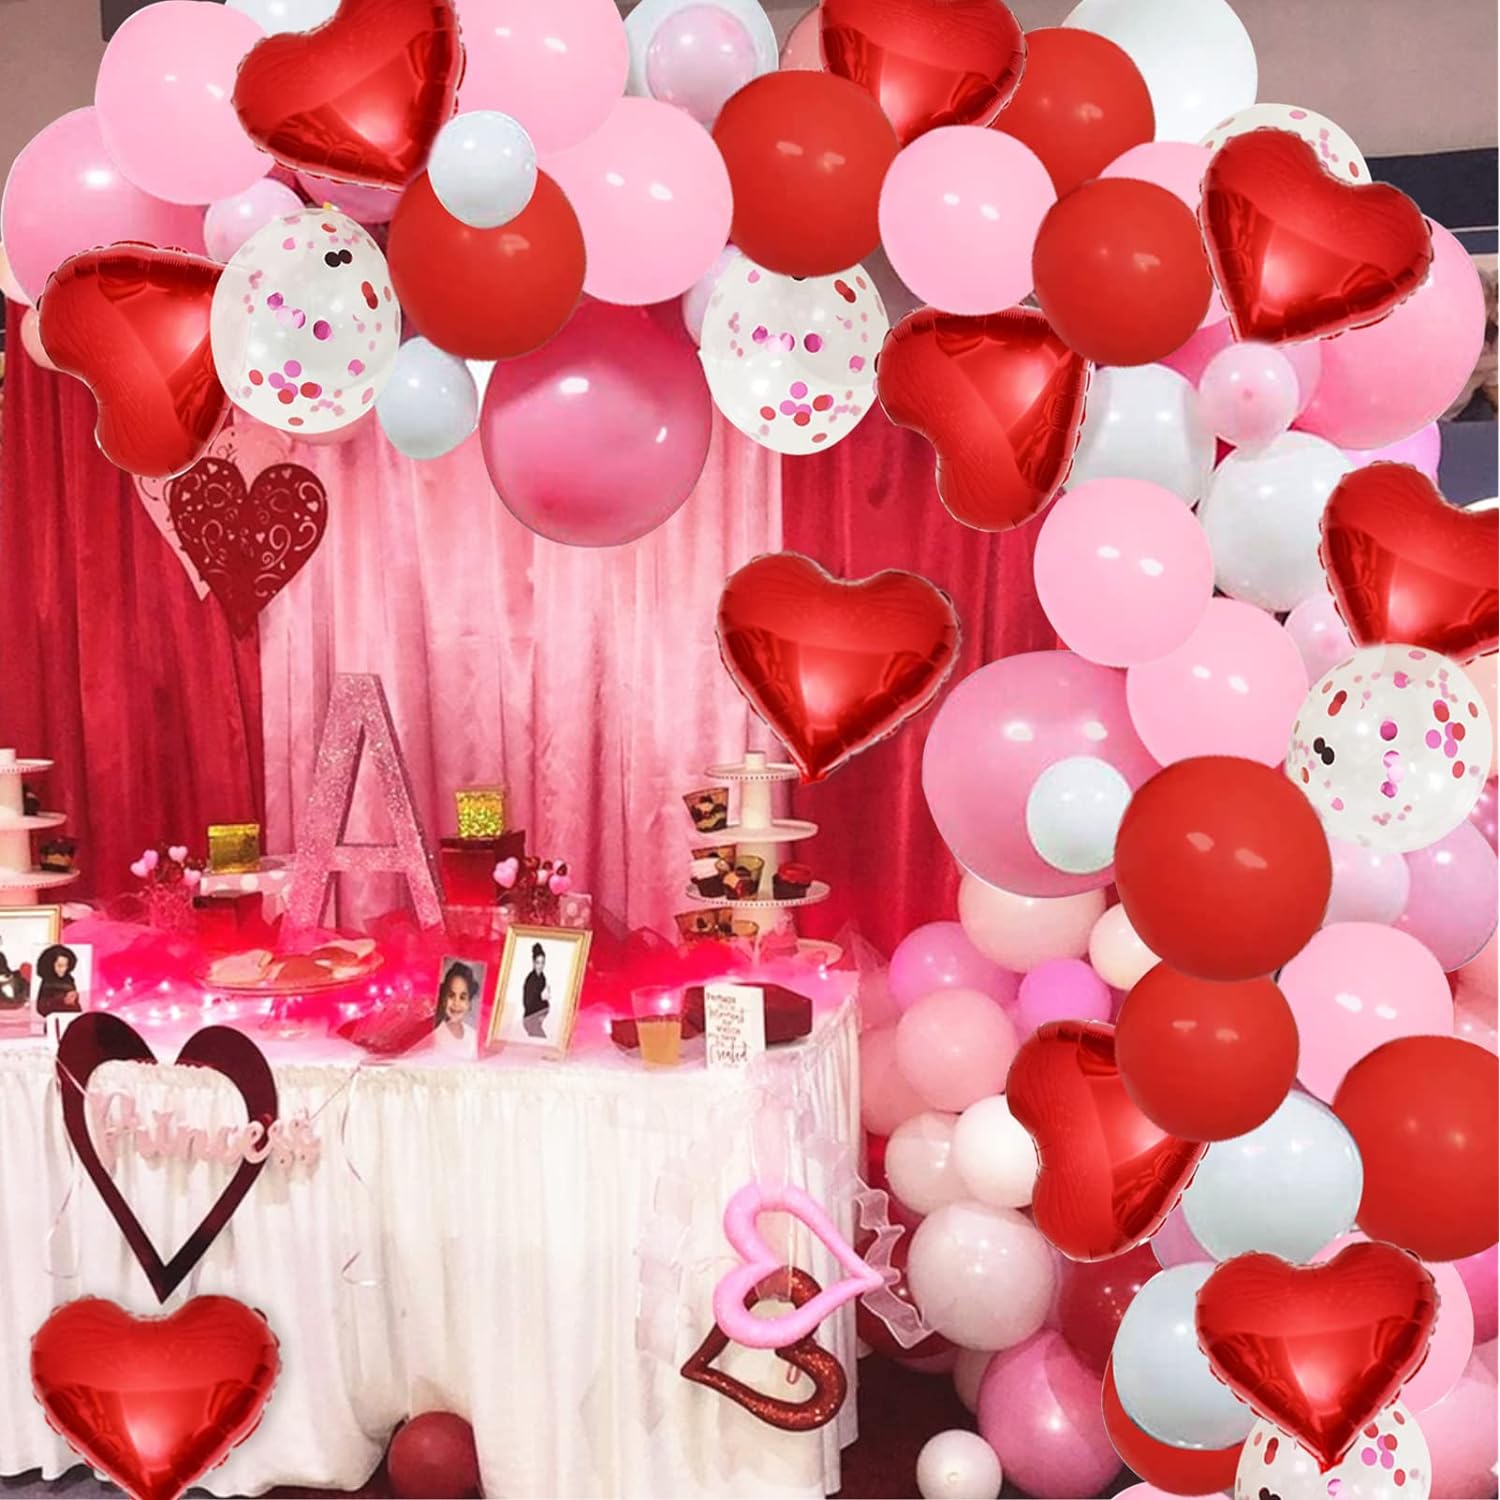 Great Choice Products Valentine'S Day Red Balloons Arch Garland Kit 110 Pack 5" 10" 12" Red Pink White Balloons Arch With Conf?